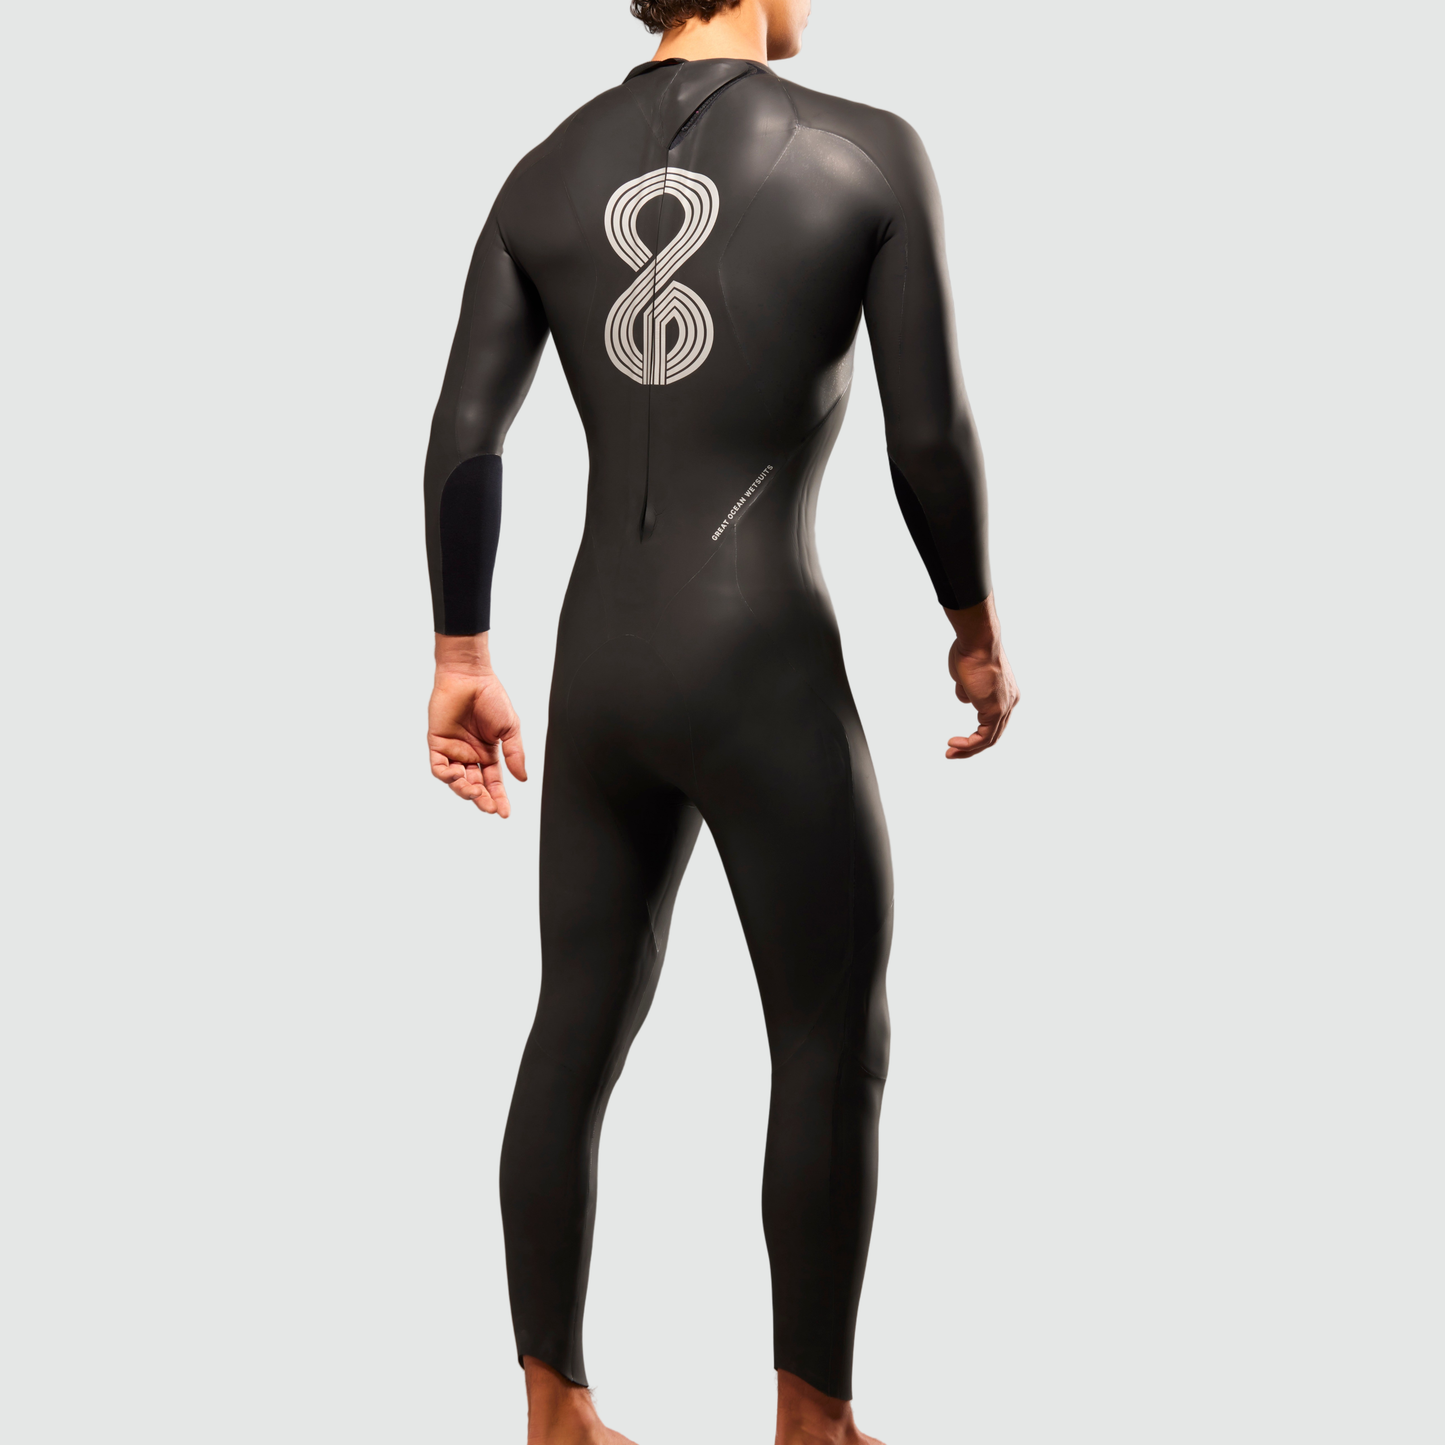 Mens Silver Wetsuit